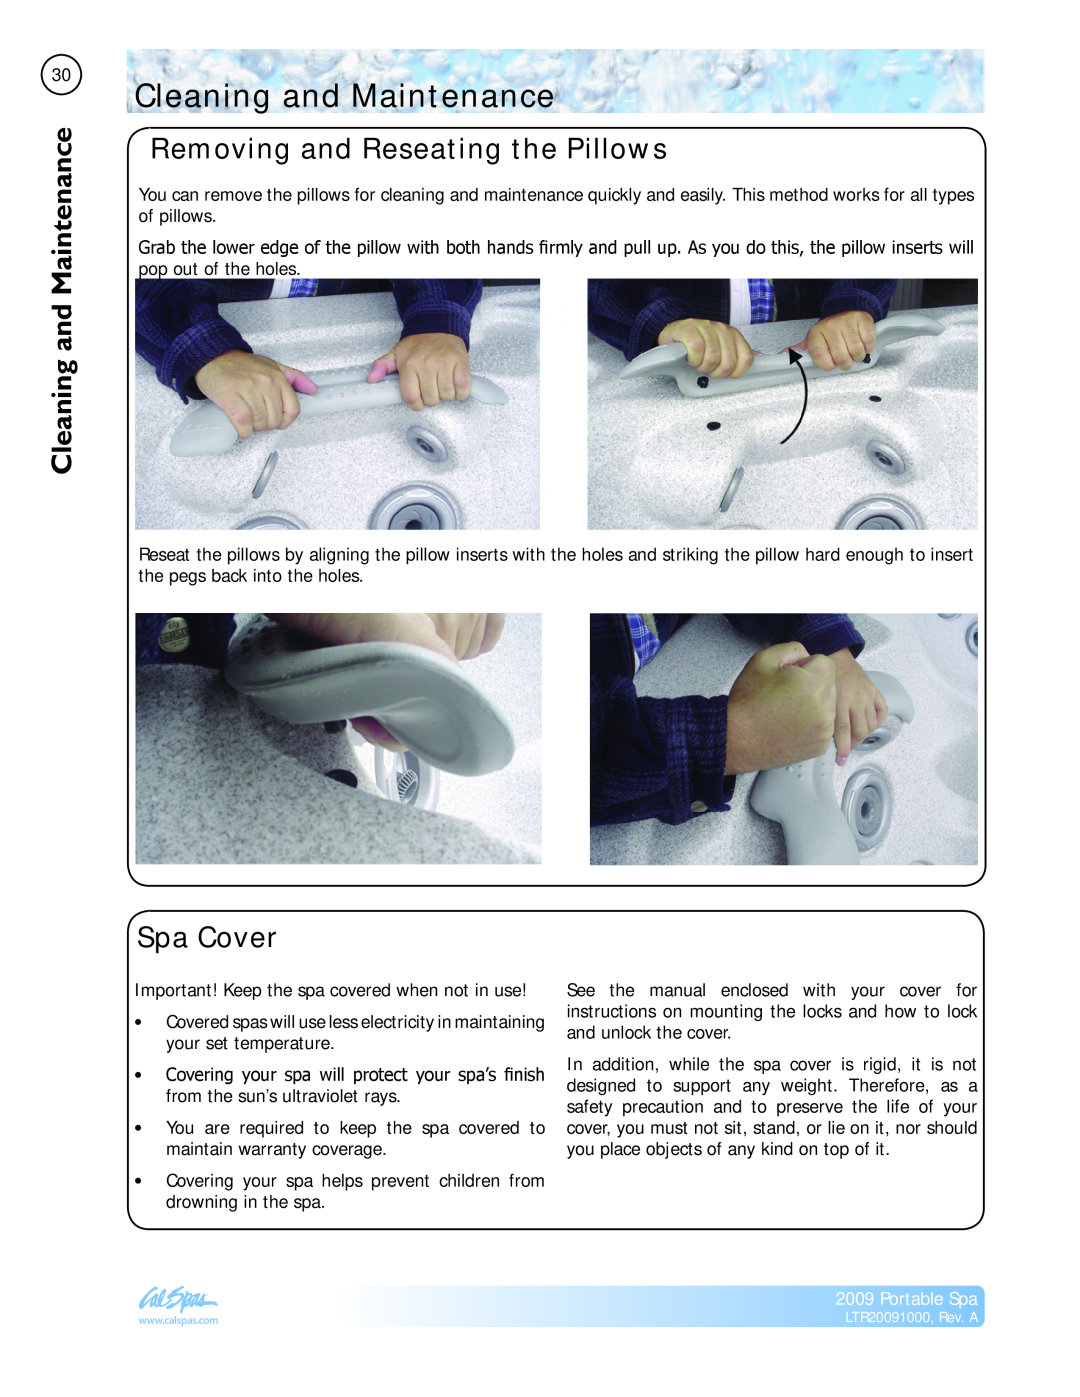 Cal Flame Portable Spa manual Cleaning and Maintenance, Removing and Reseating the Pillows, Spa Cover 